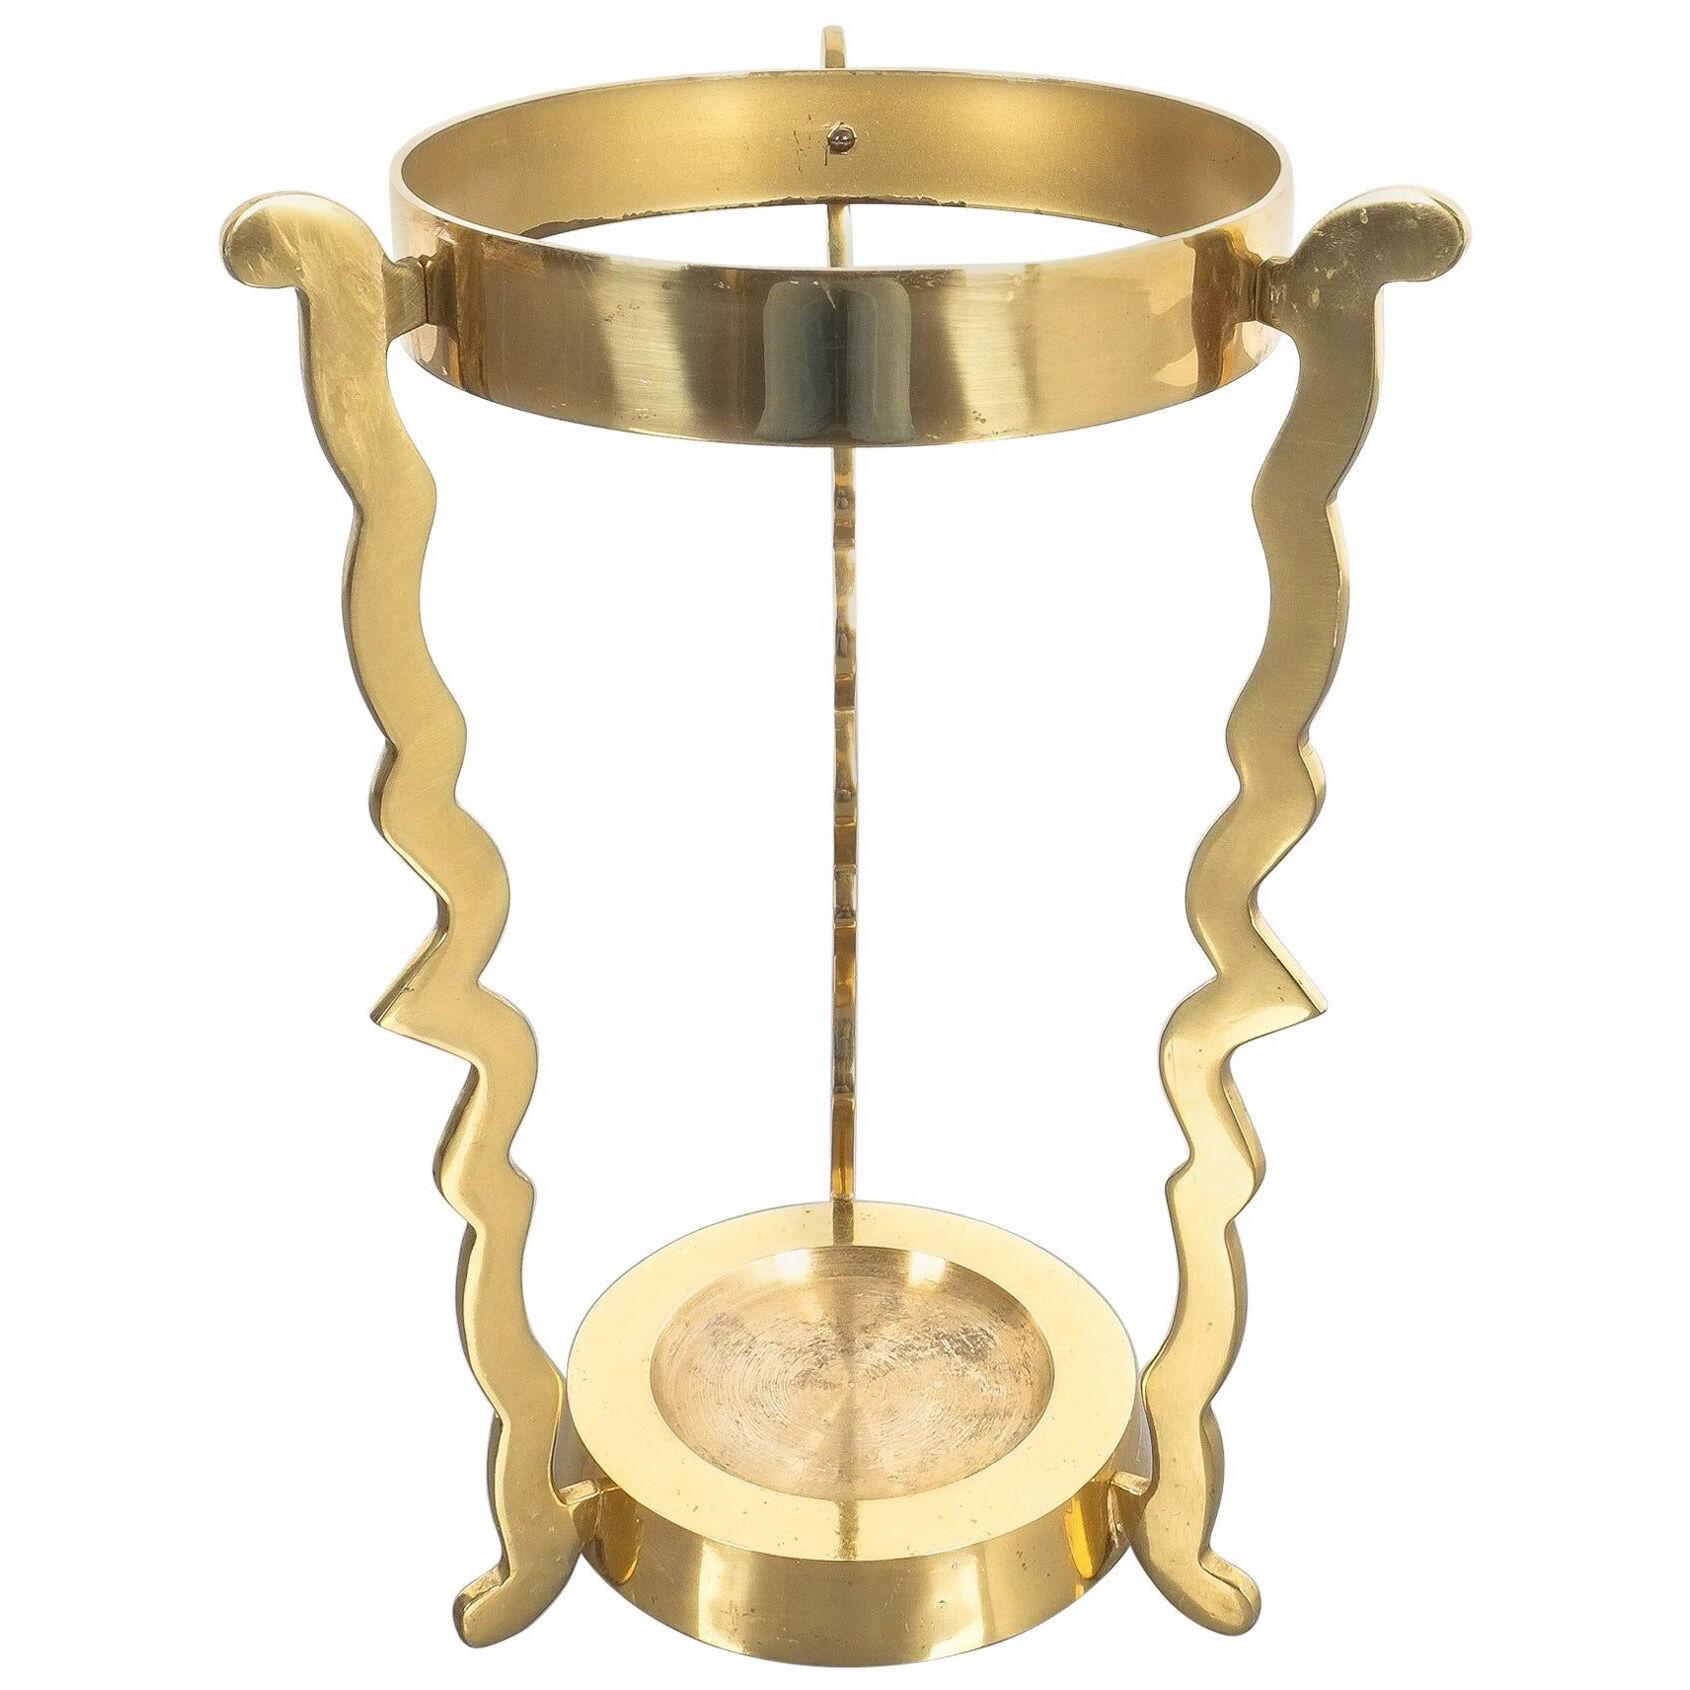 Midcentury Umbrella Stand From Solid Brass